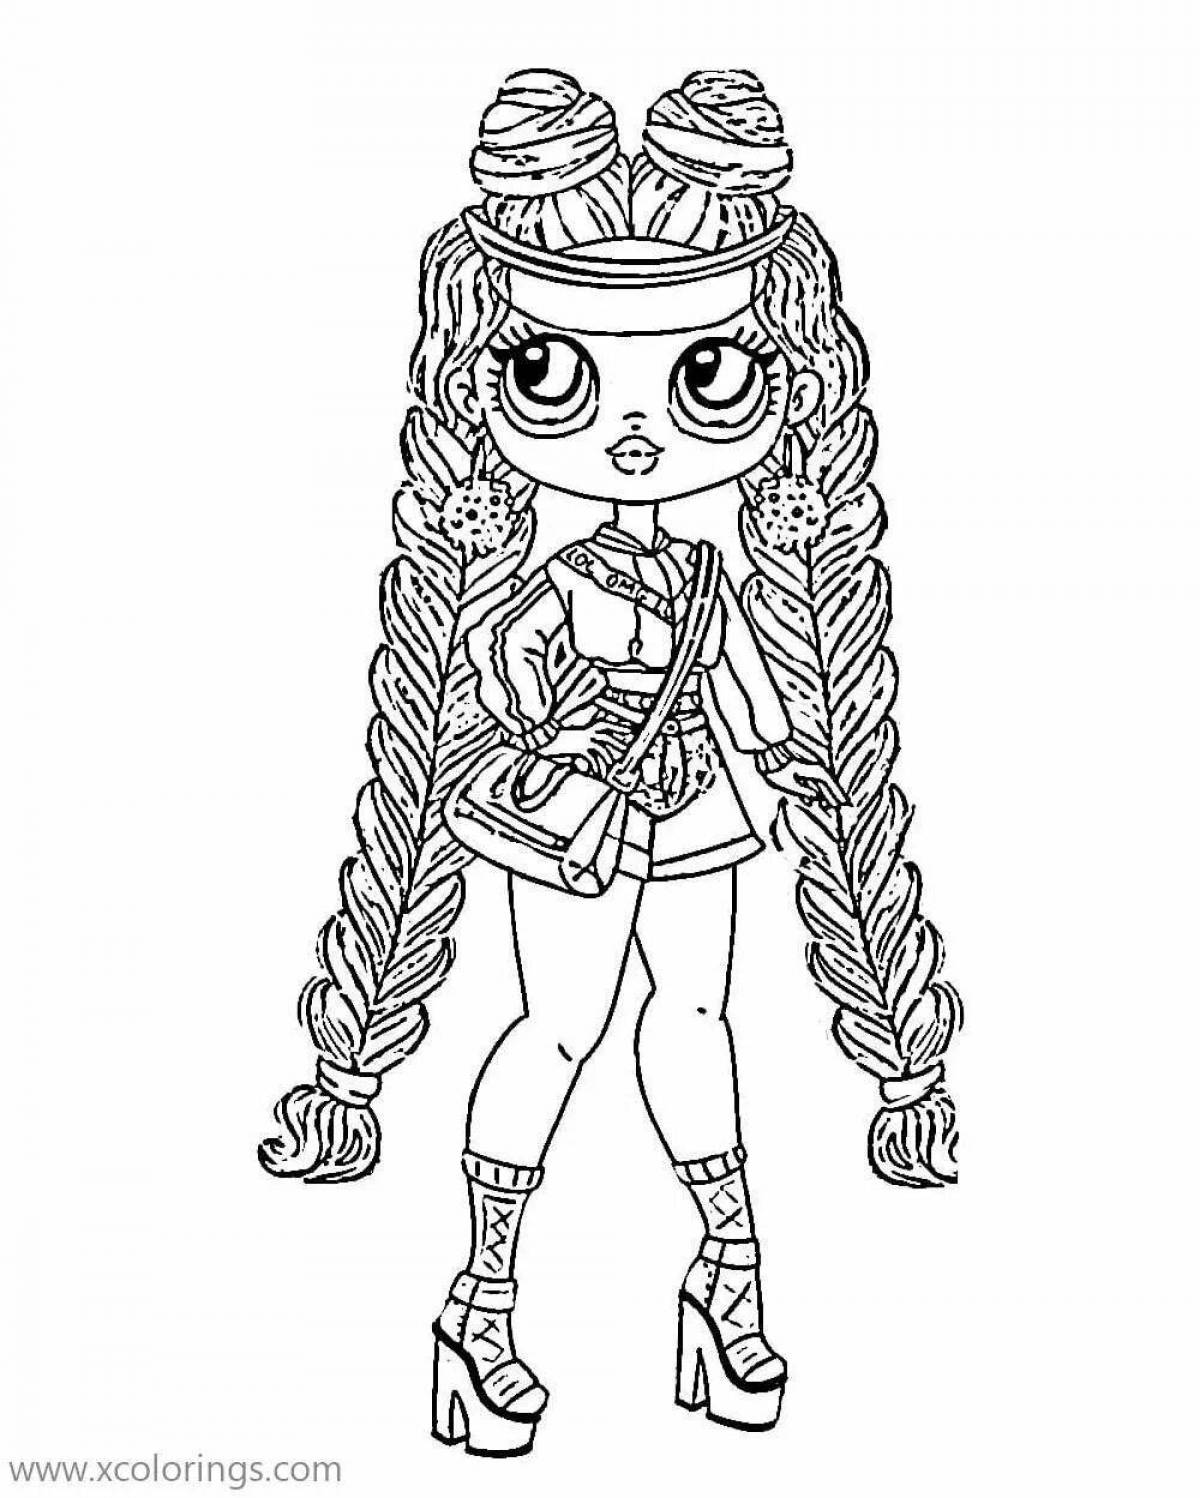 Radiant coloring page lol adult doll